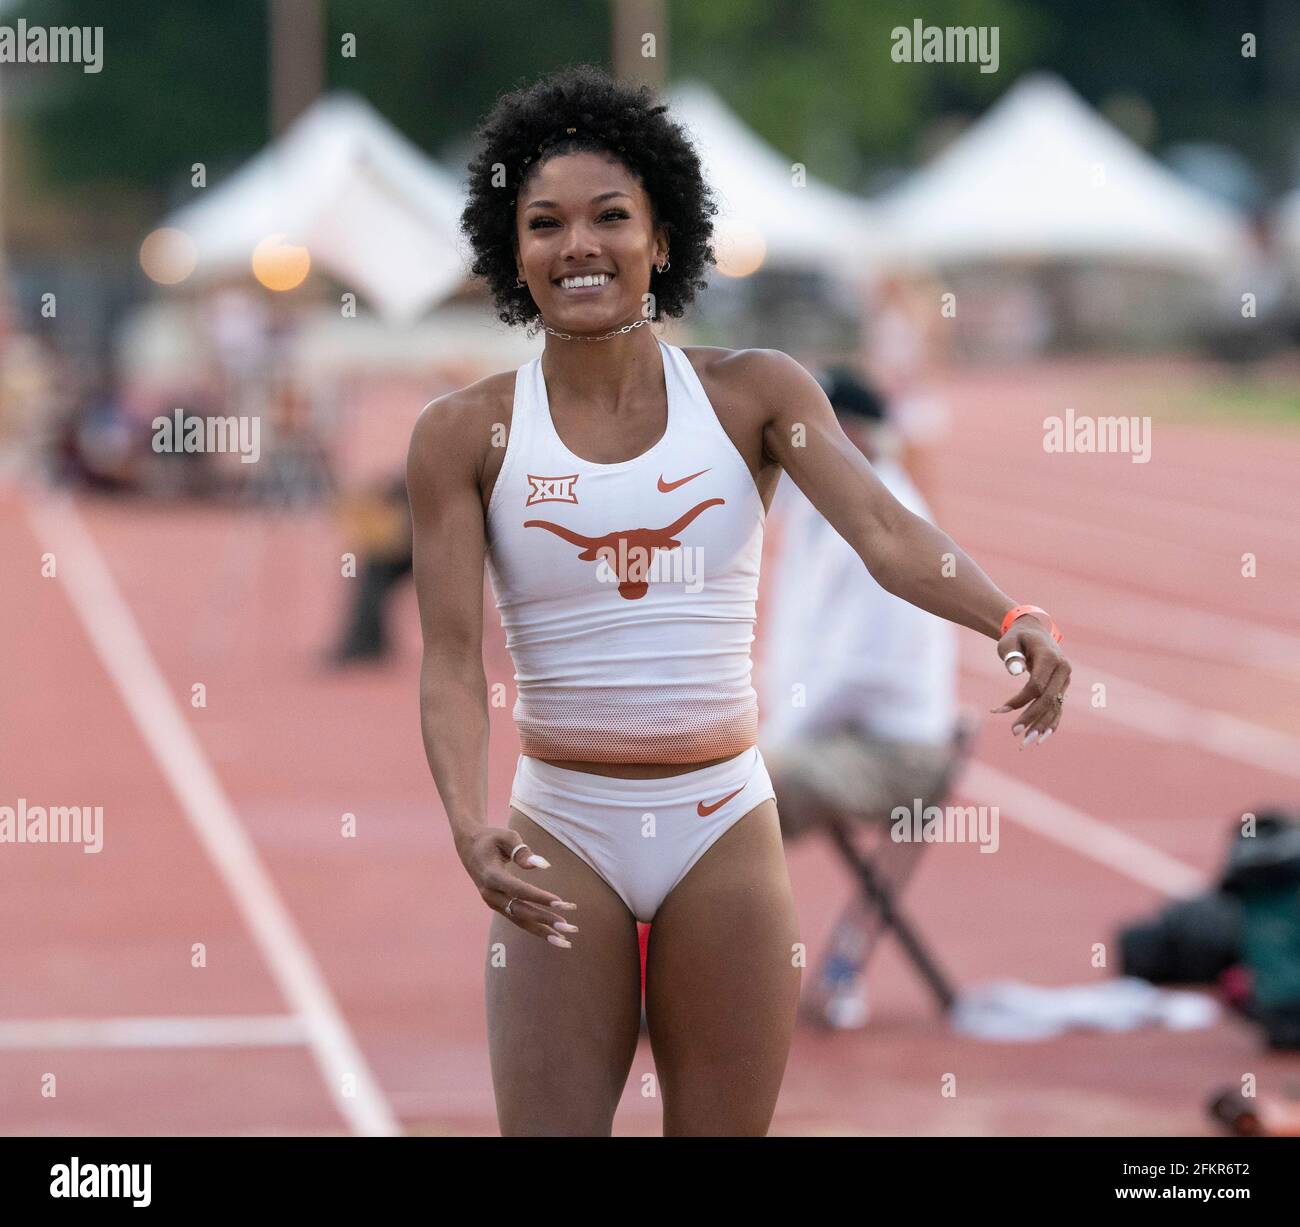 Austin, Texas, USA. 01st May, 2021. University of Texas women's long jump ace Tara Davis smiles after an easy victory at the Texas Invitational as she continues a quest for a spot on the 2021 U.S. Olympic team. Credit: Bob Daemmrich/Alamy Live News Credit: Bob Daemmrich/Alamy Live News Stock Photo